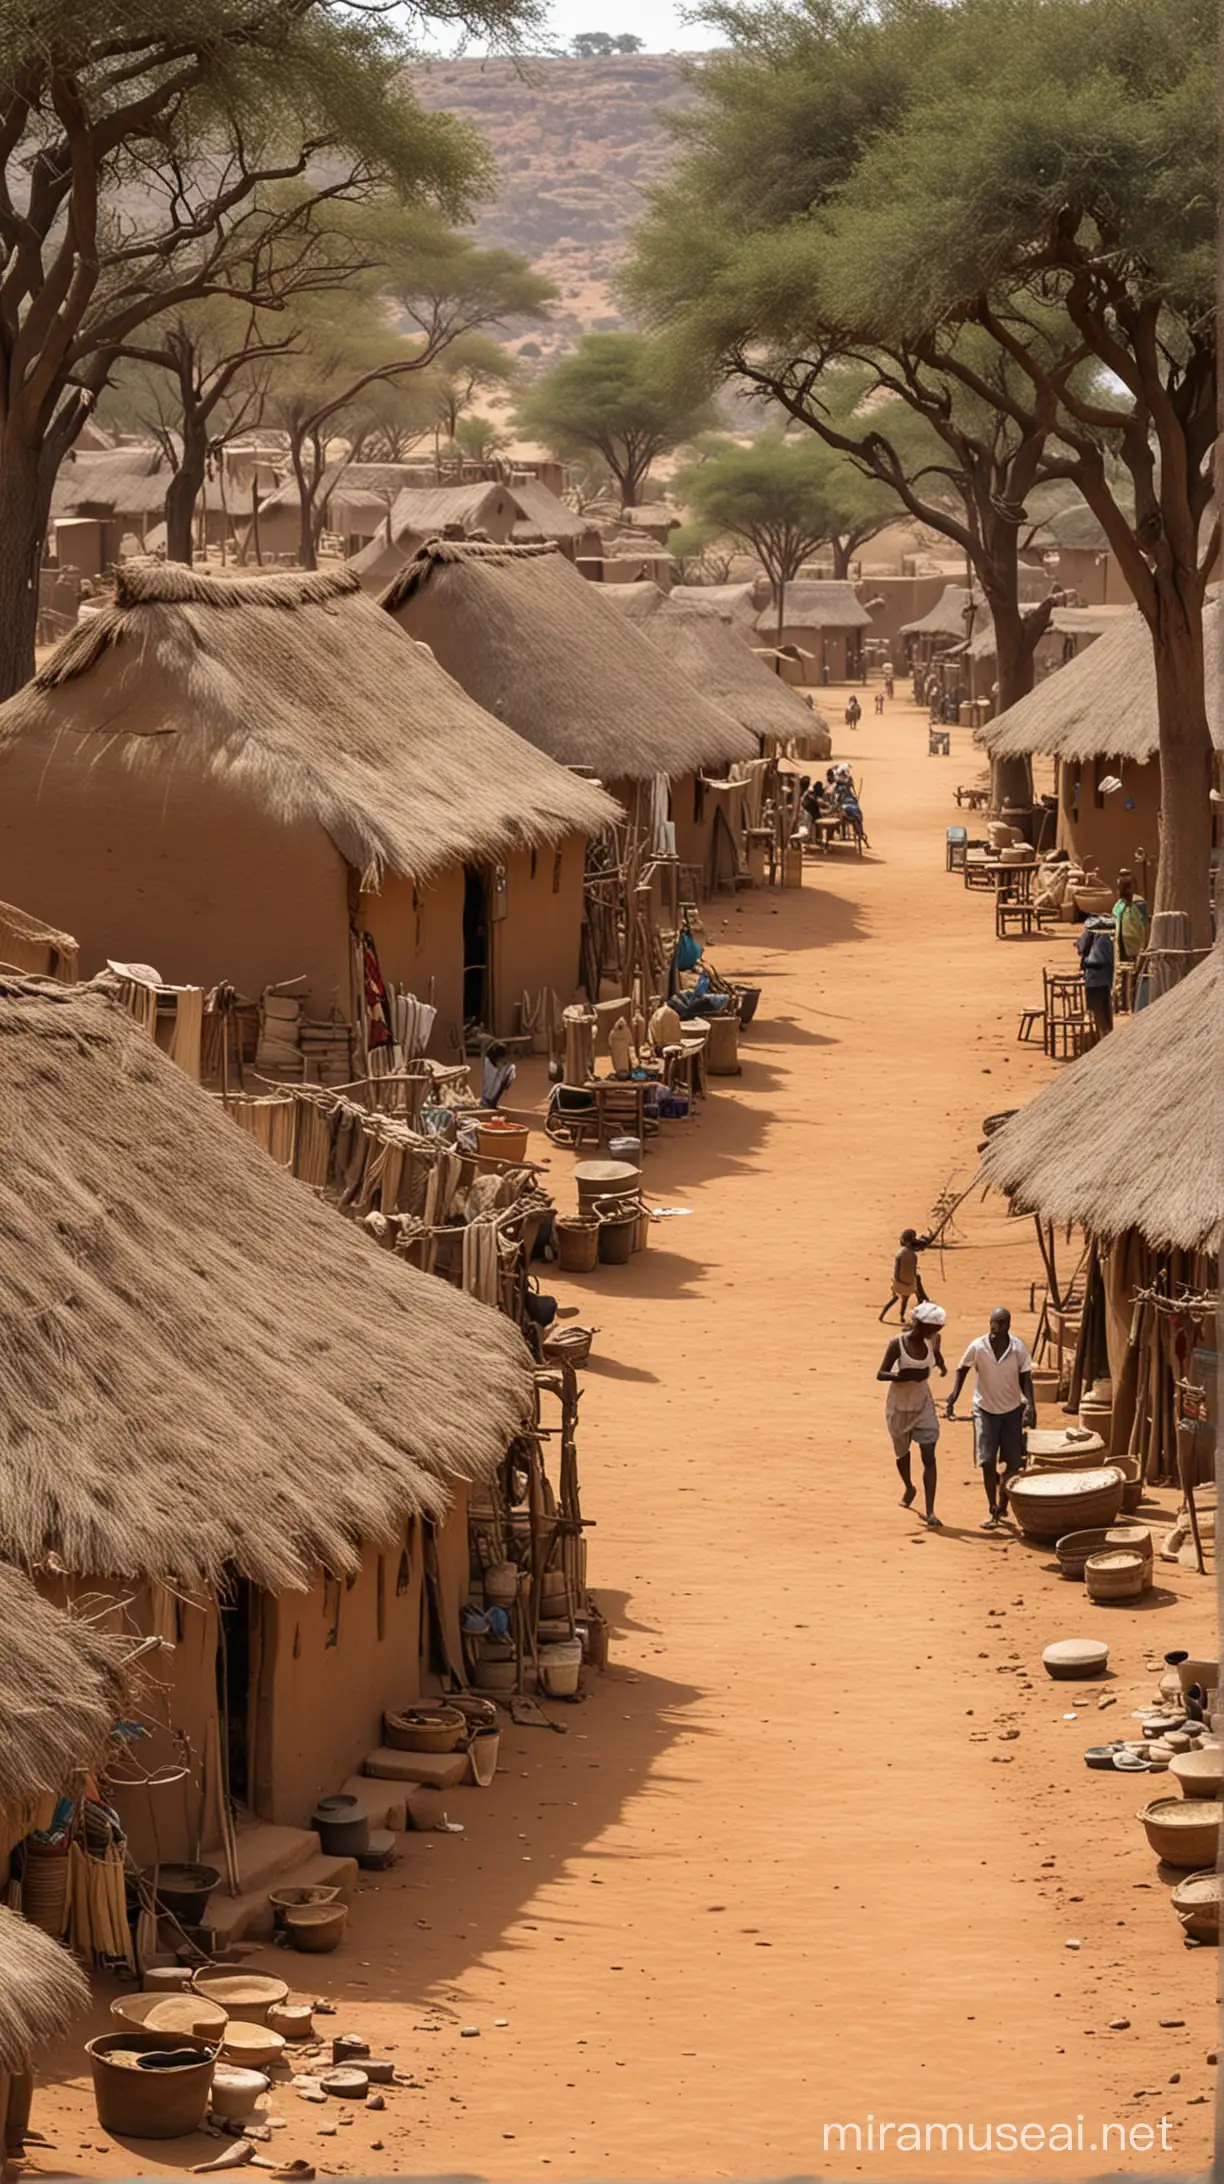 Traditional African Village Scene with Mud Huts and Tribal Life